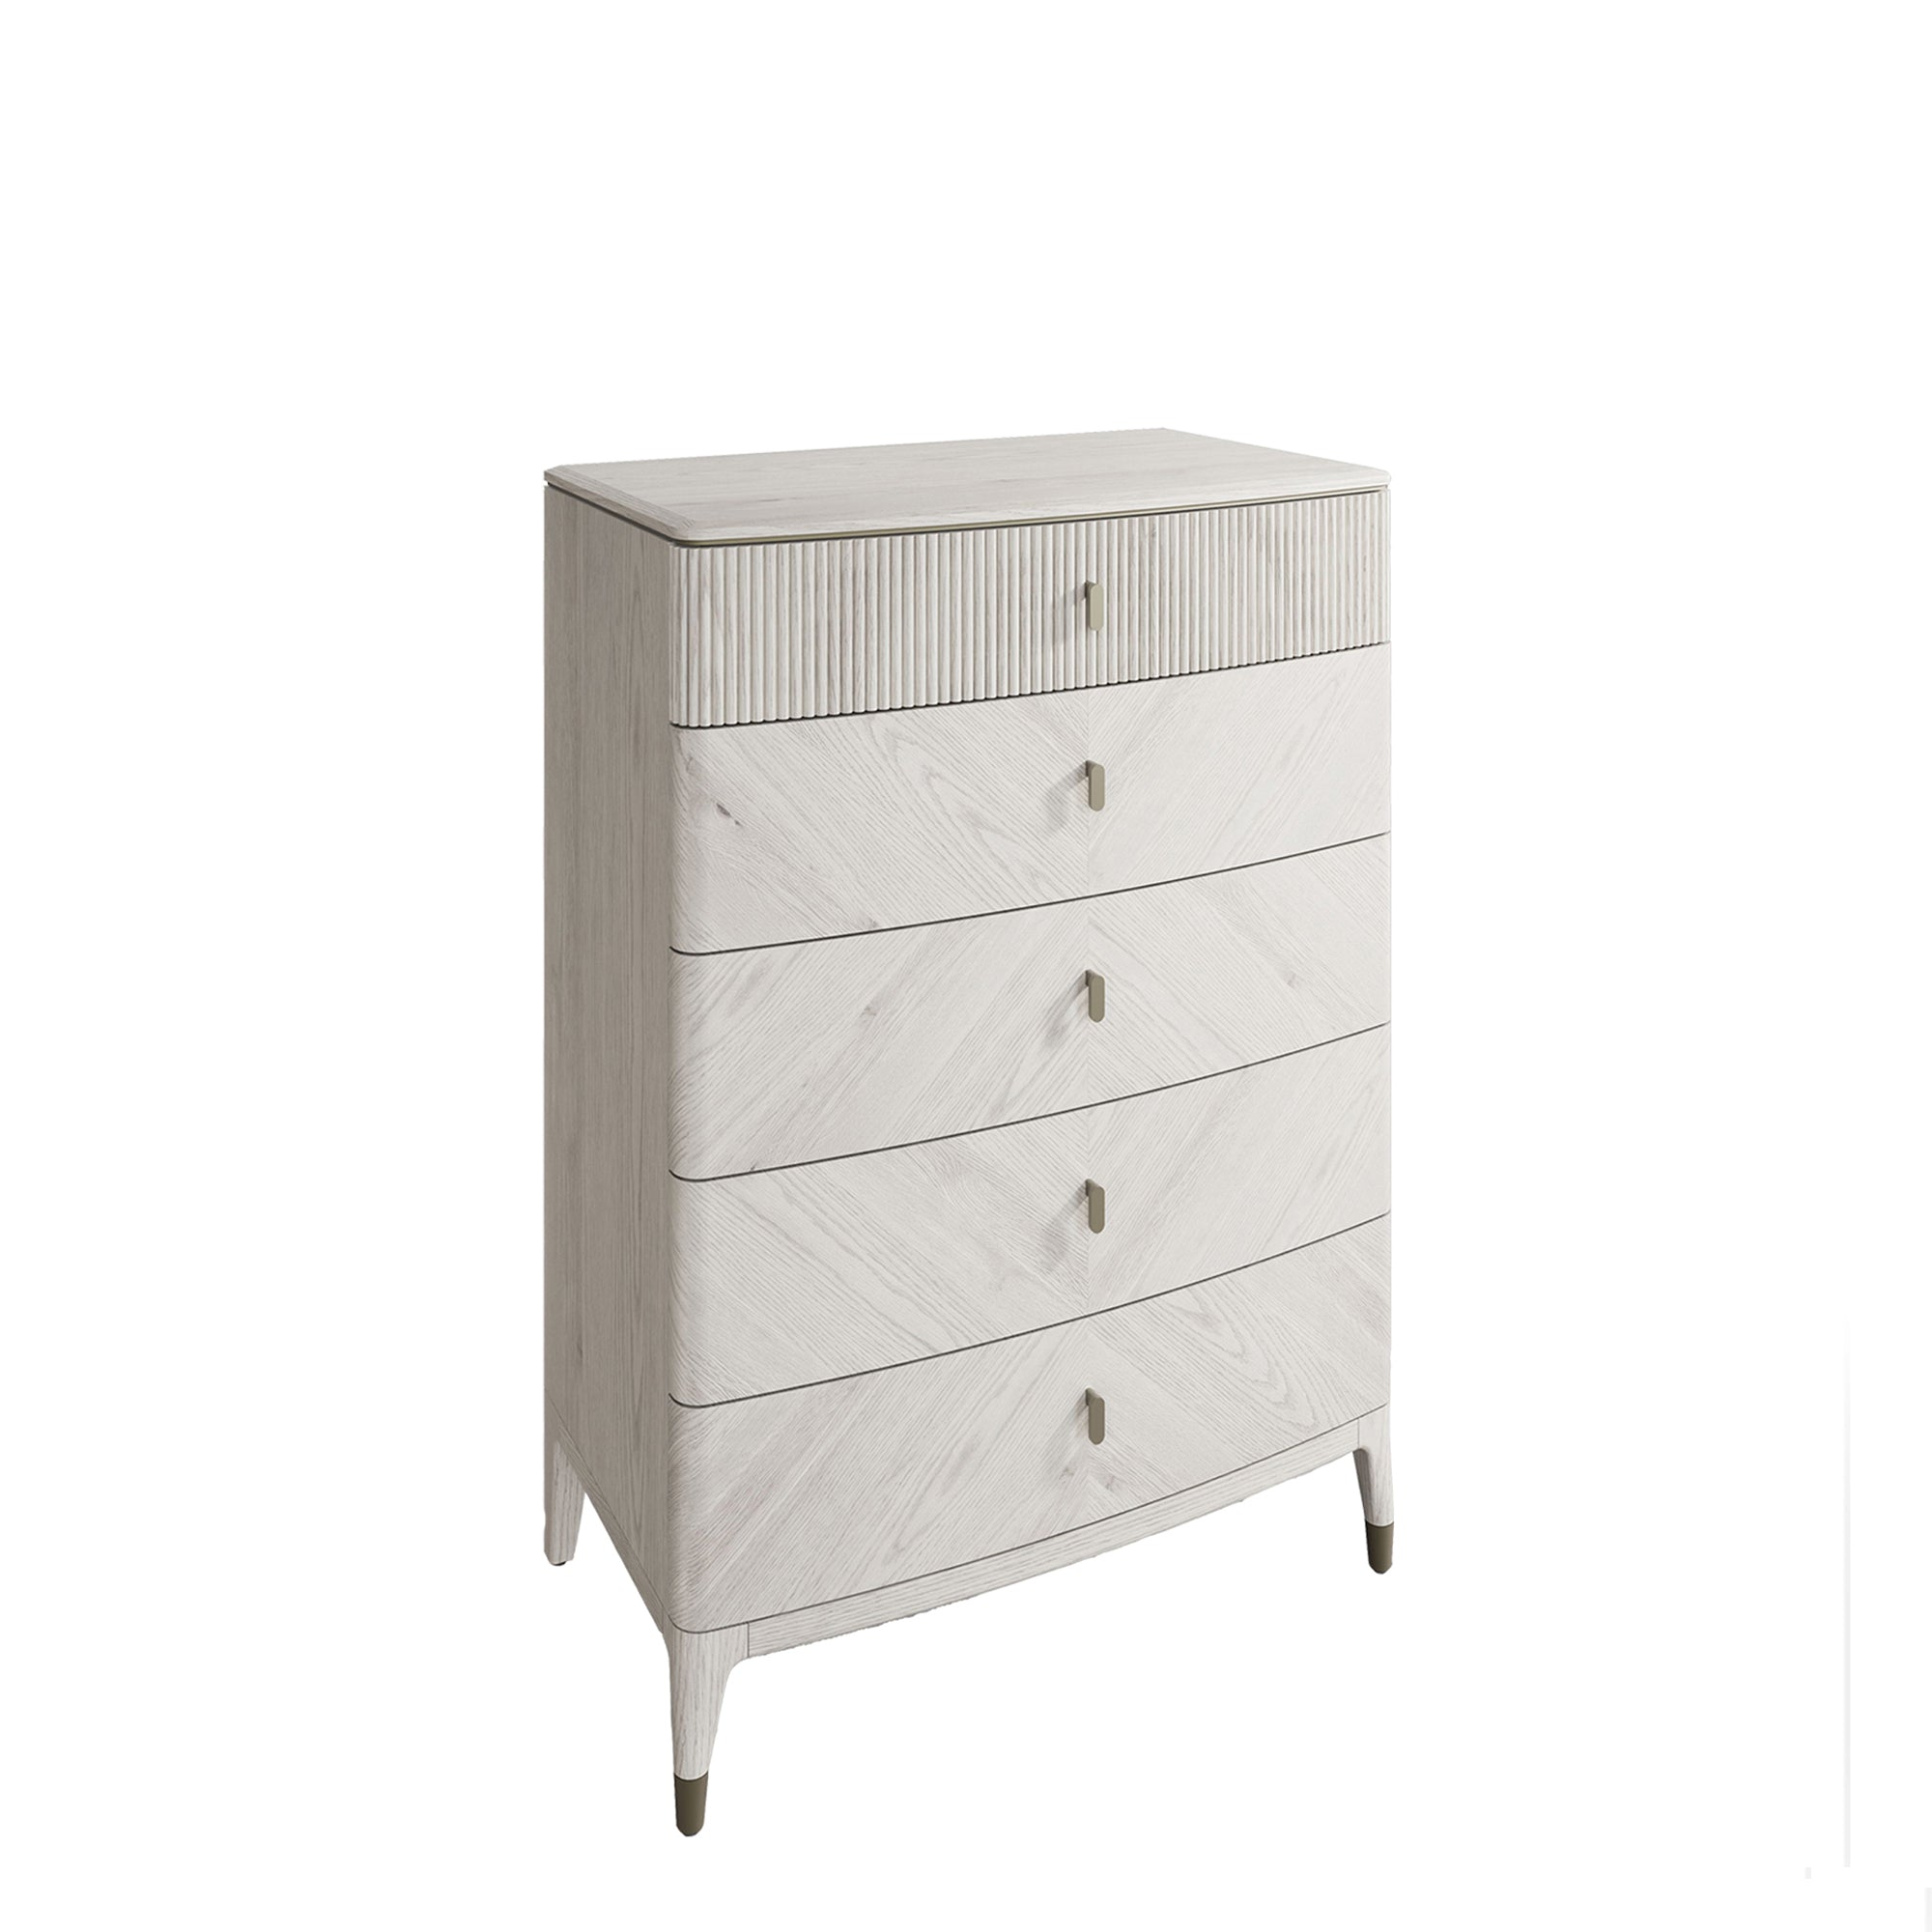 Dynasty - 5 Drawer Tall Chest In Stone Finish